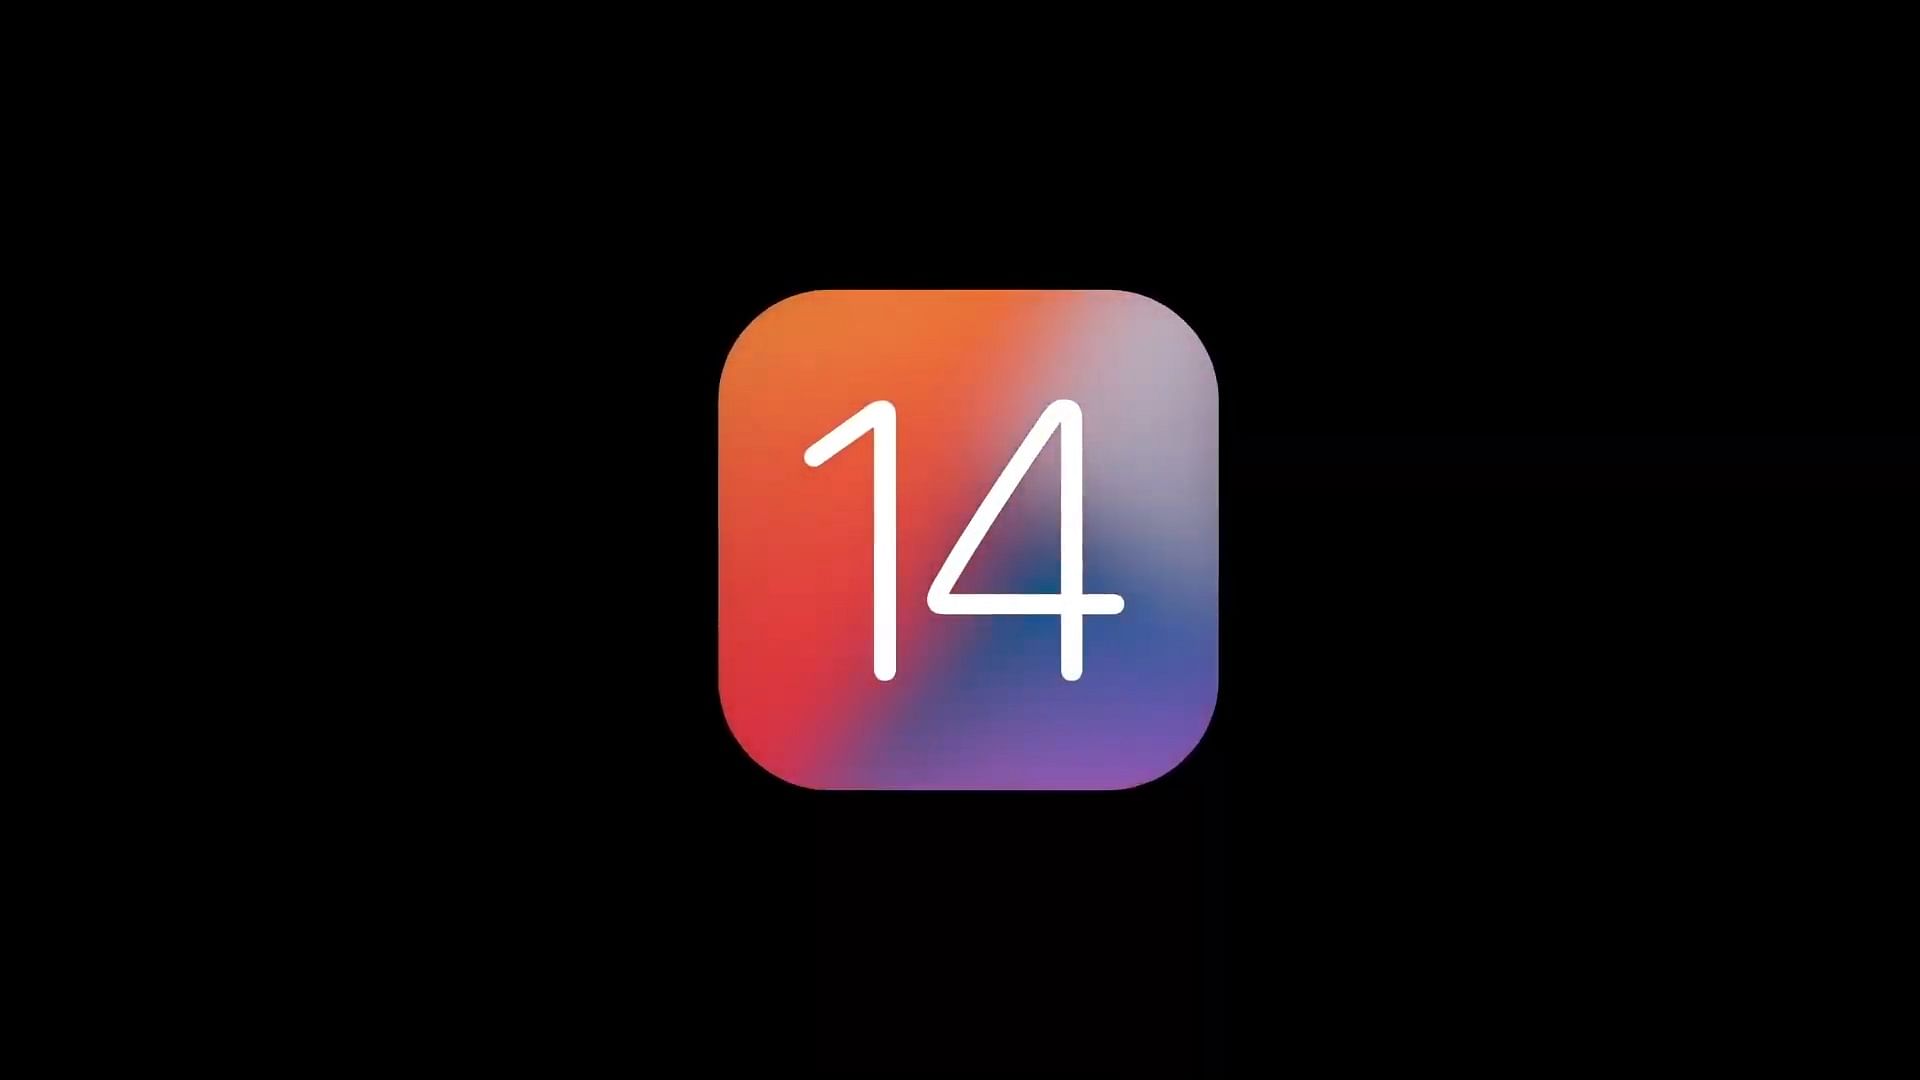 the new iOS 14 has been announced.